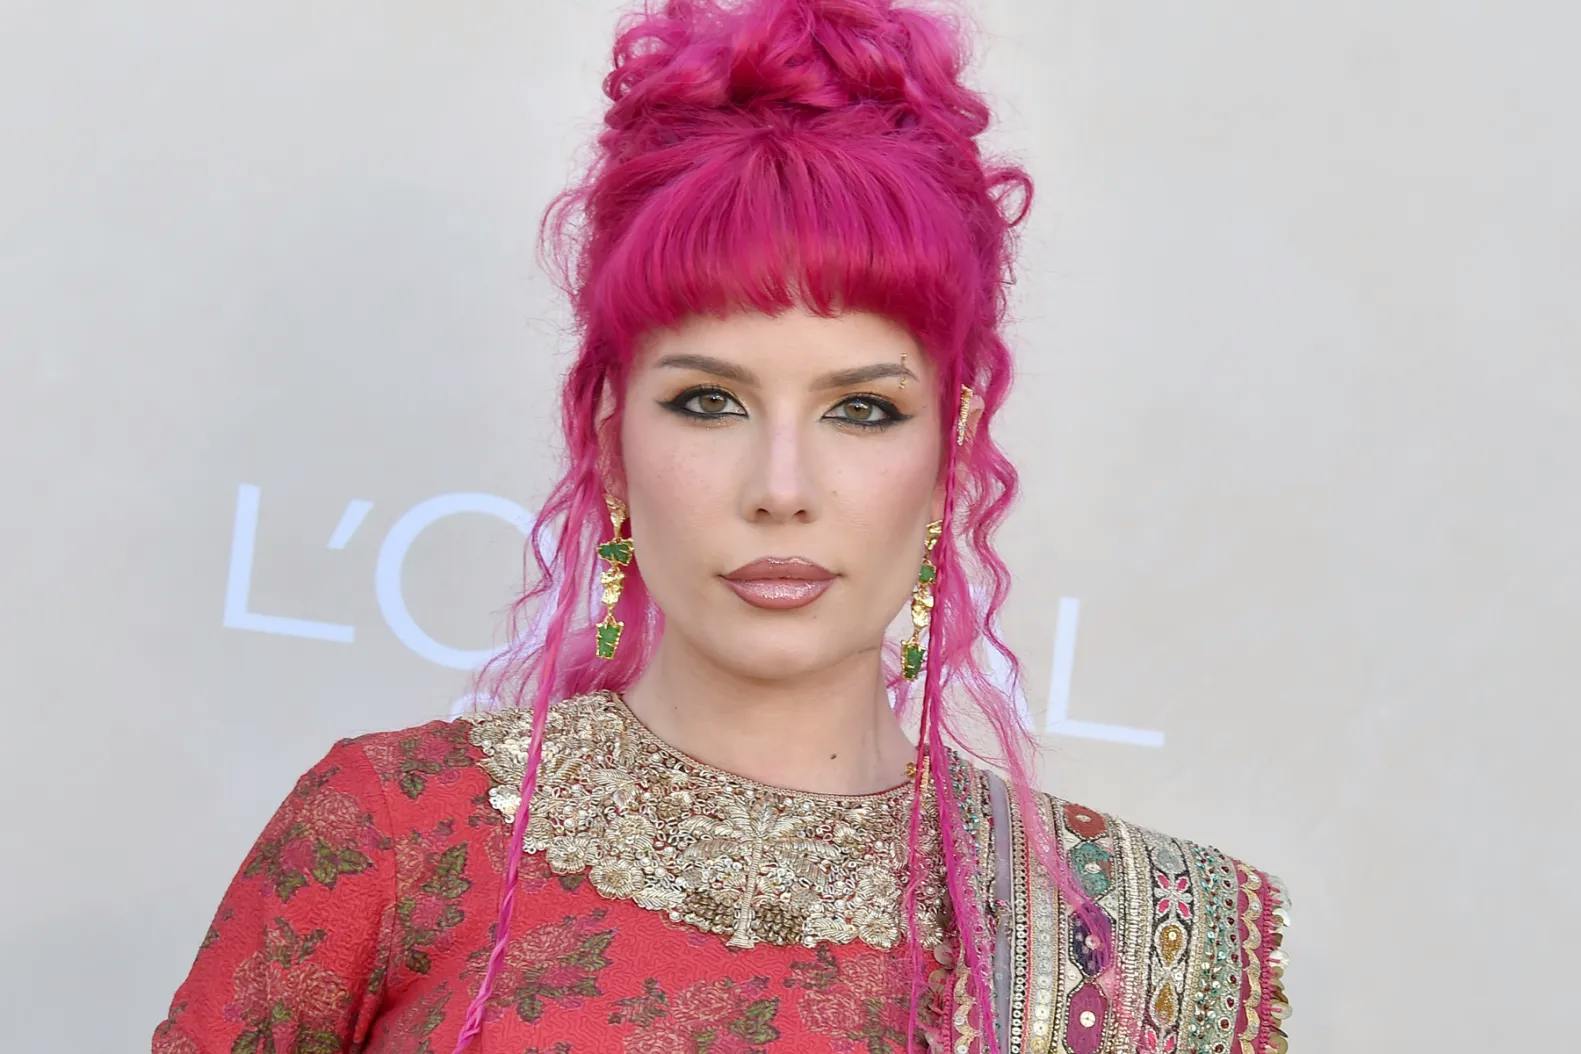 Halsey Photo by Gregg Deguire/Variety/Getty Images